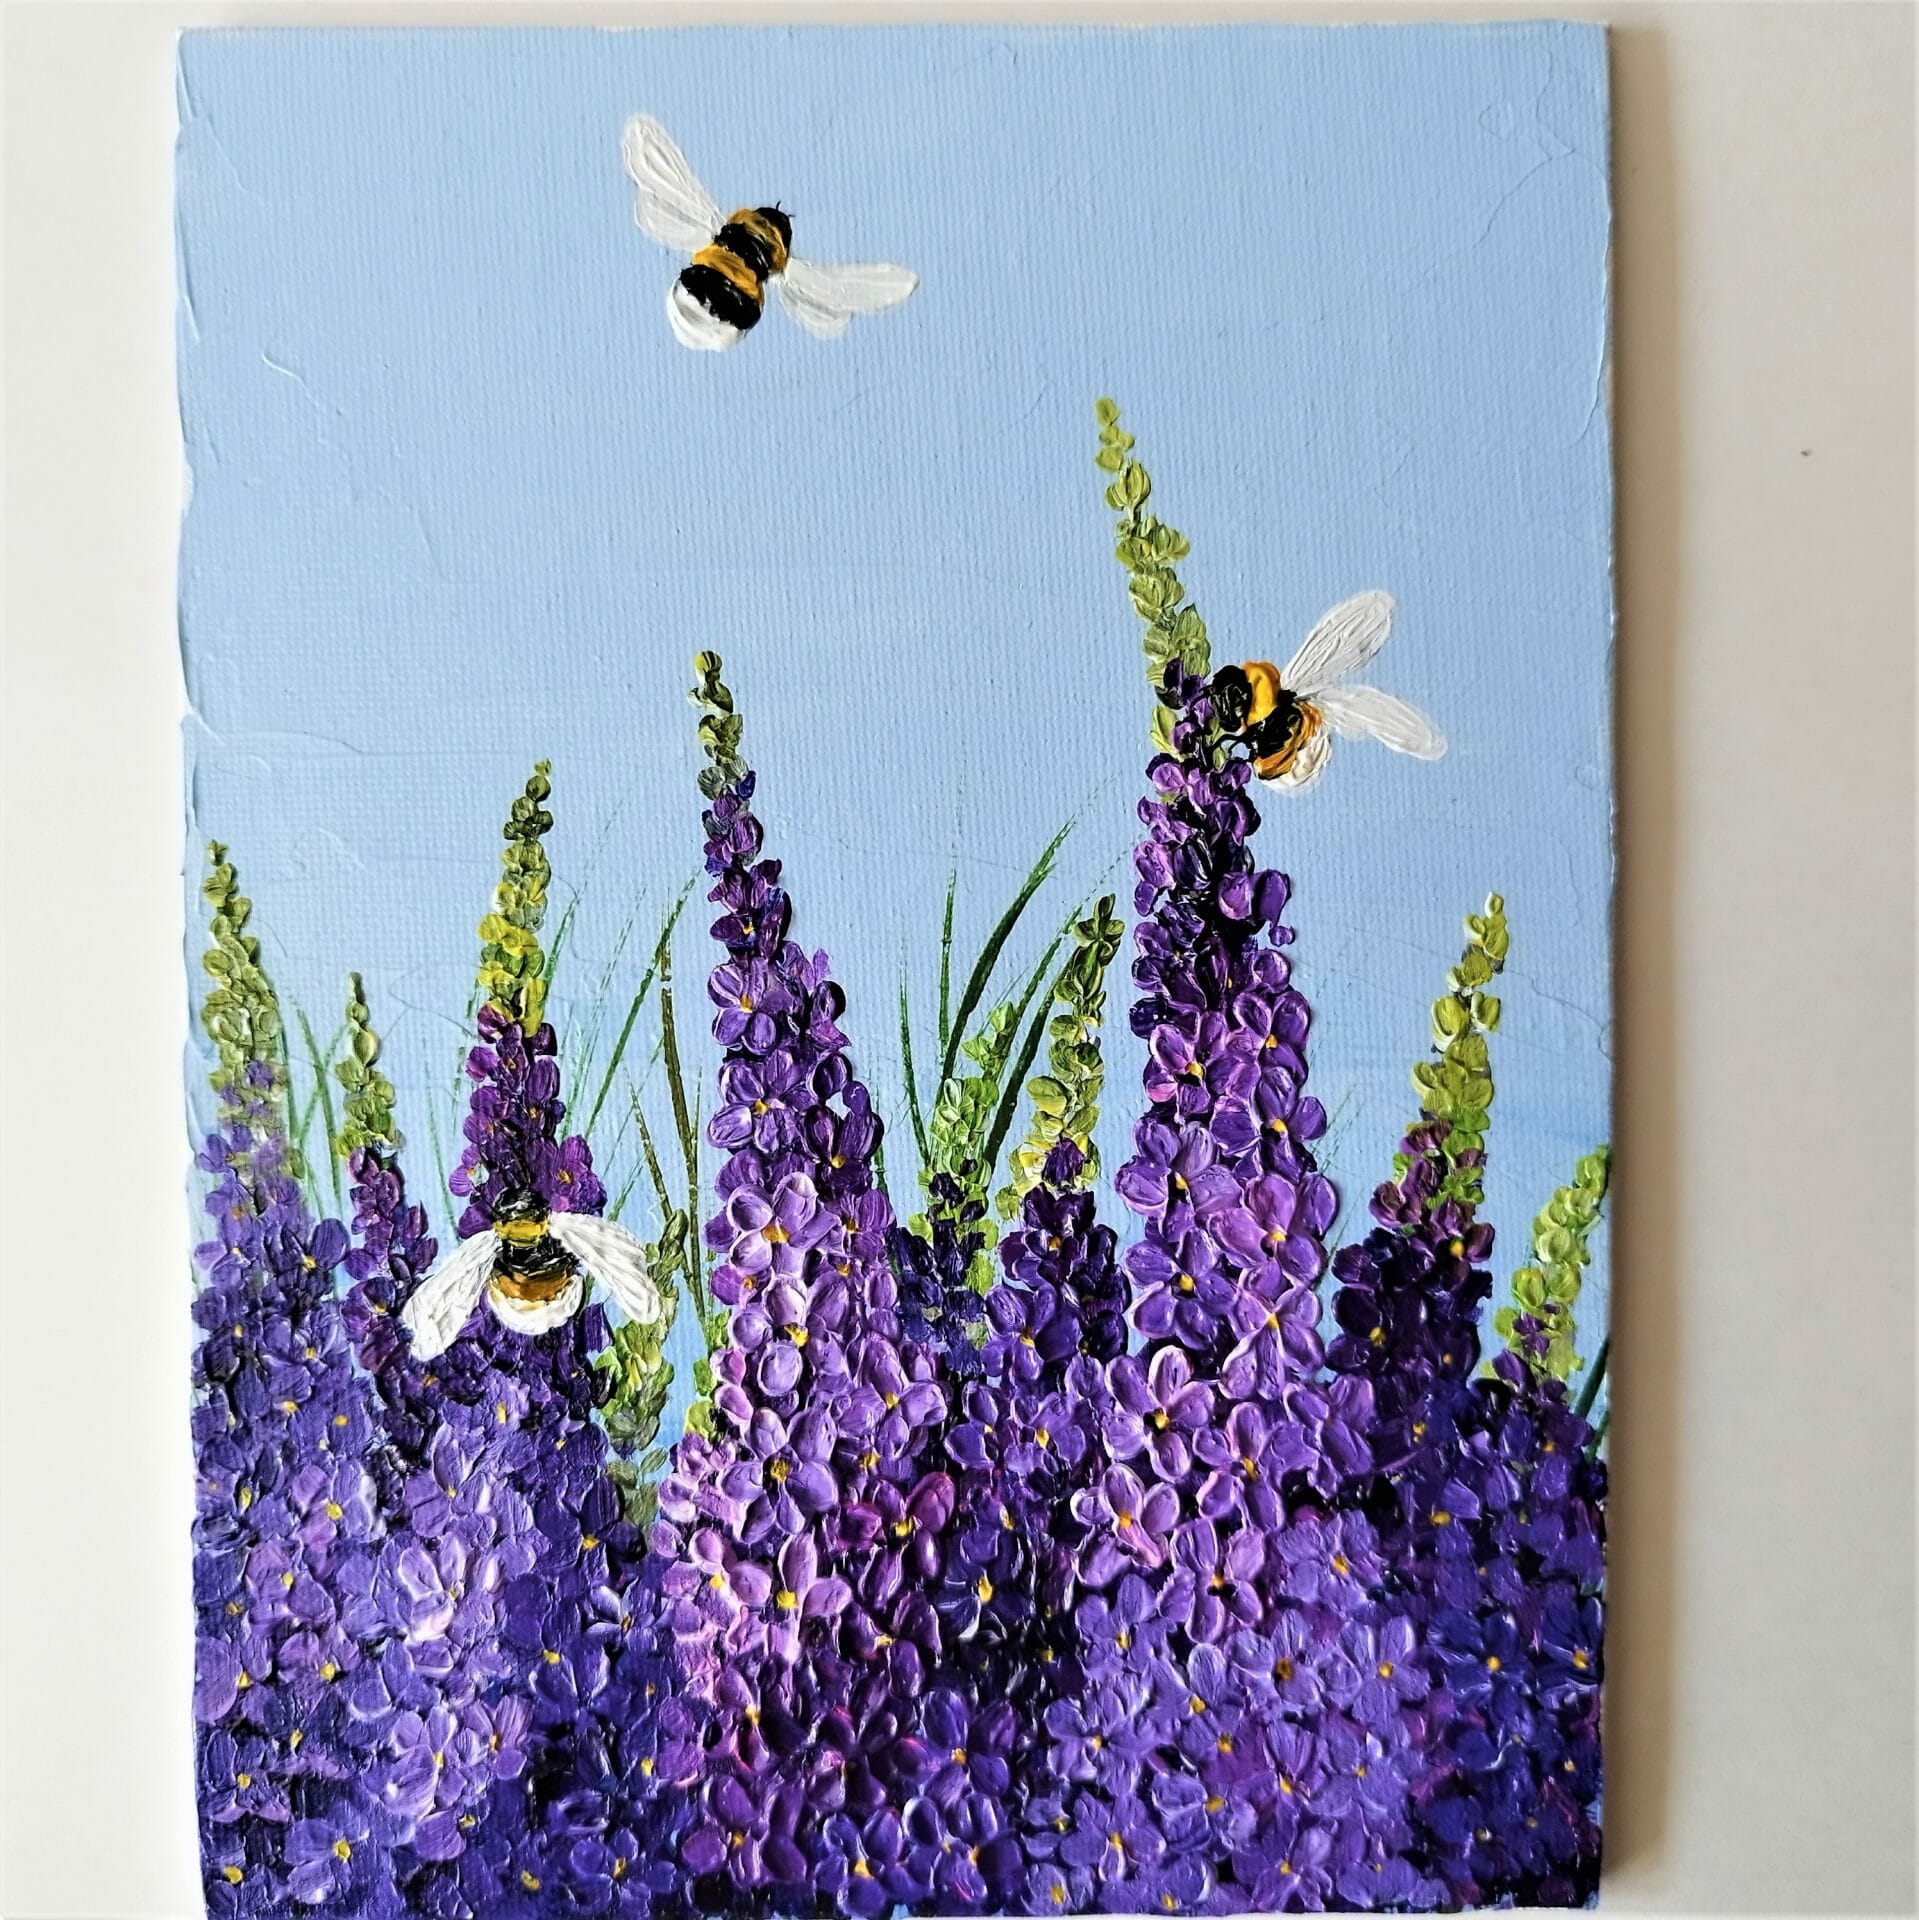 bumblebee on a flower textured painting wall decor